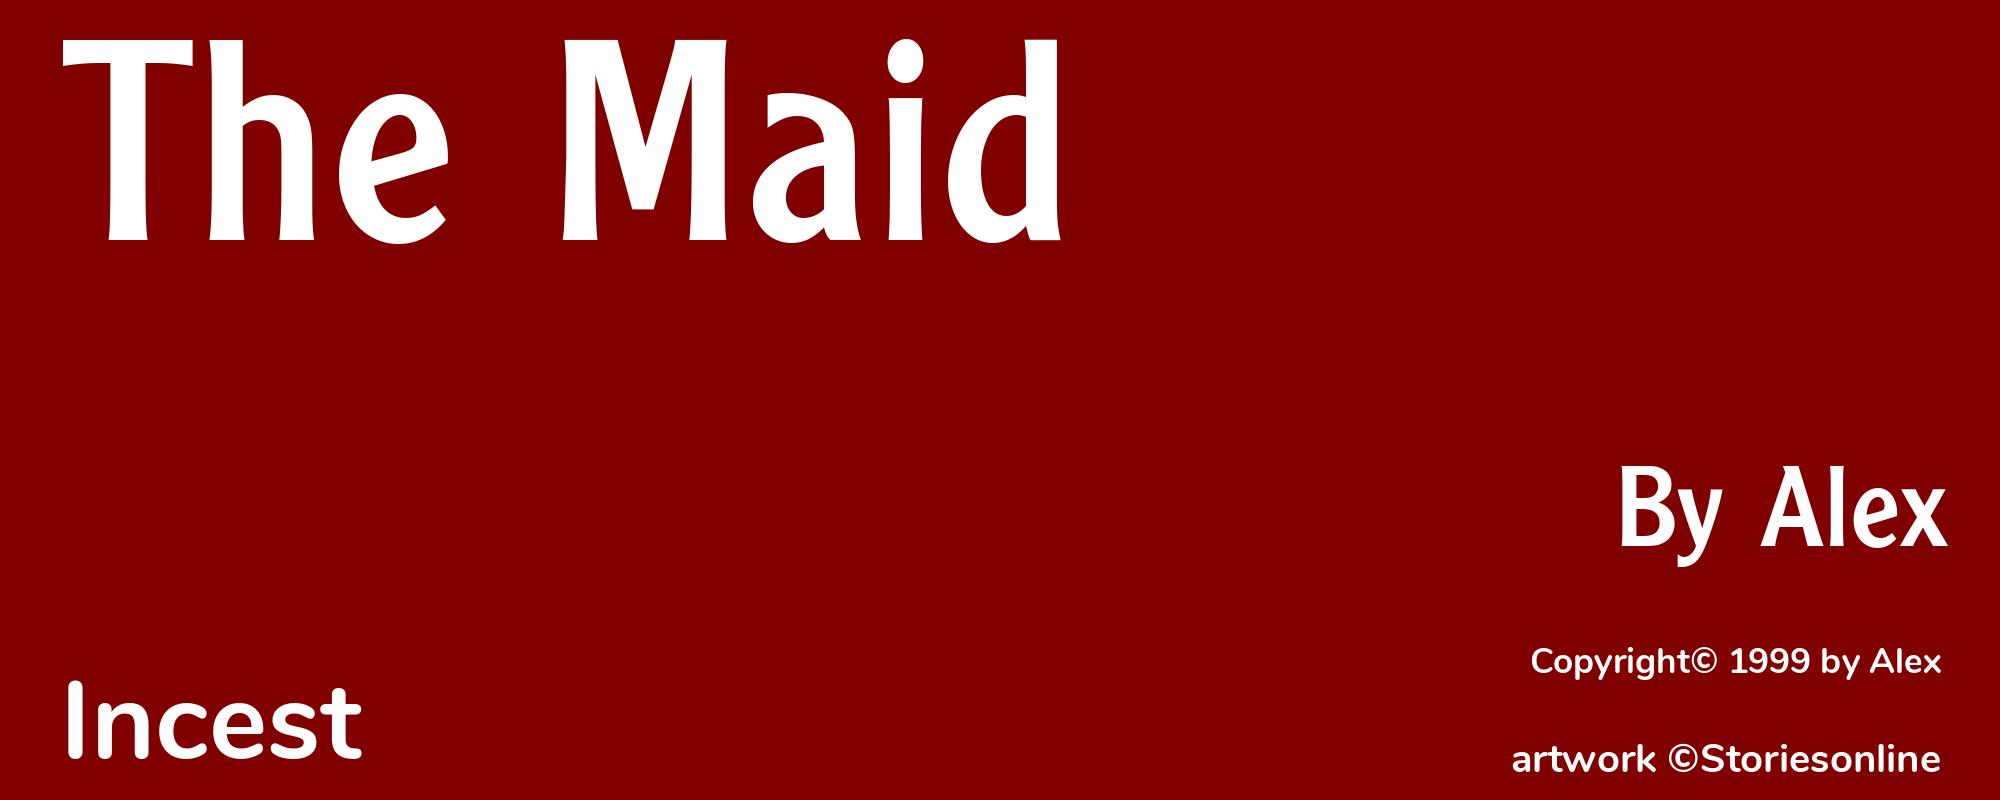 The Maid - Cover